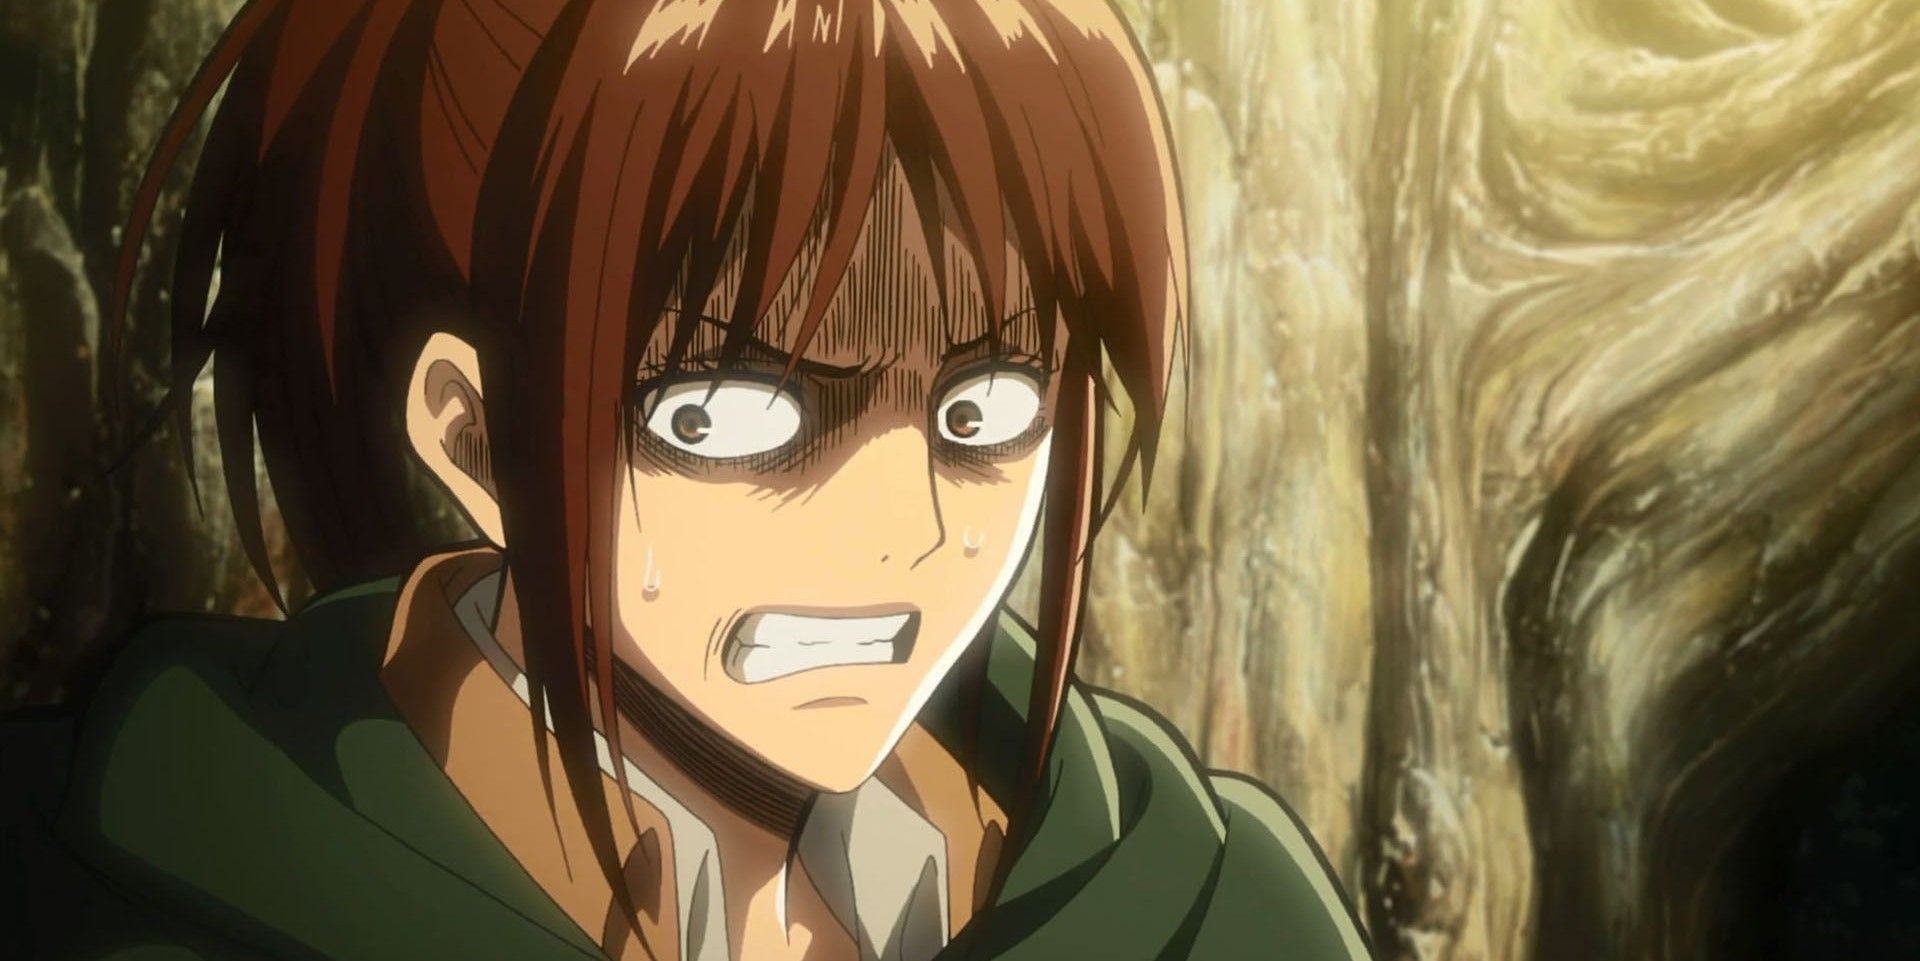 Sasha freaking out after hearing Female Titan's screams